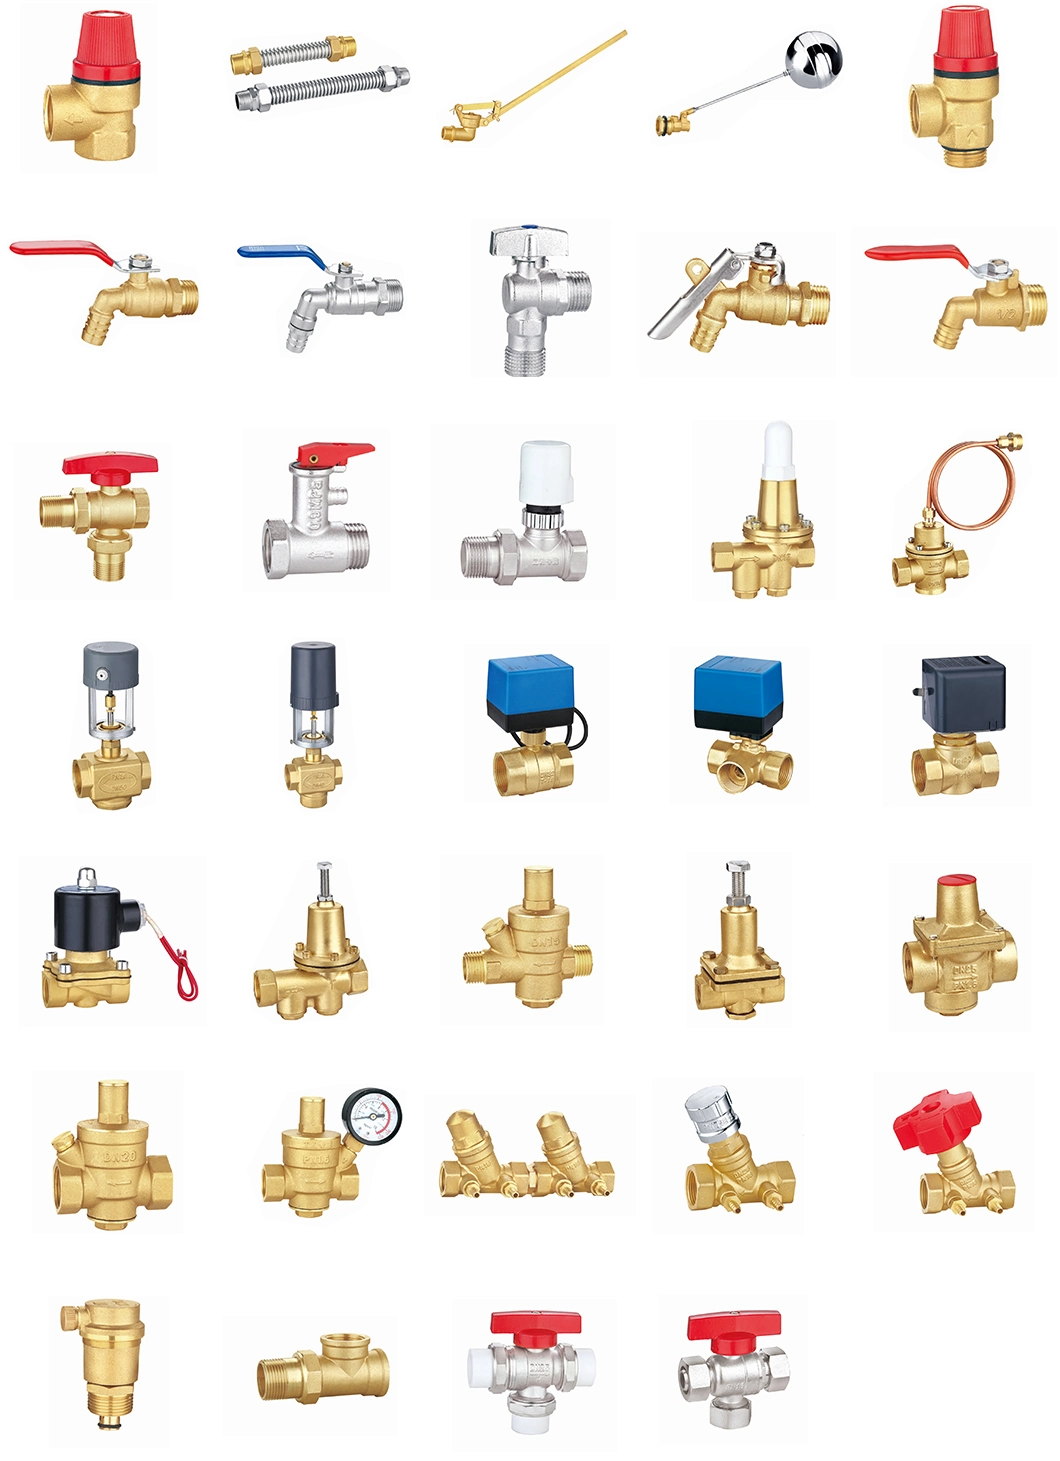 Thread Electric Control Valve for  Heating System